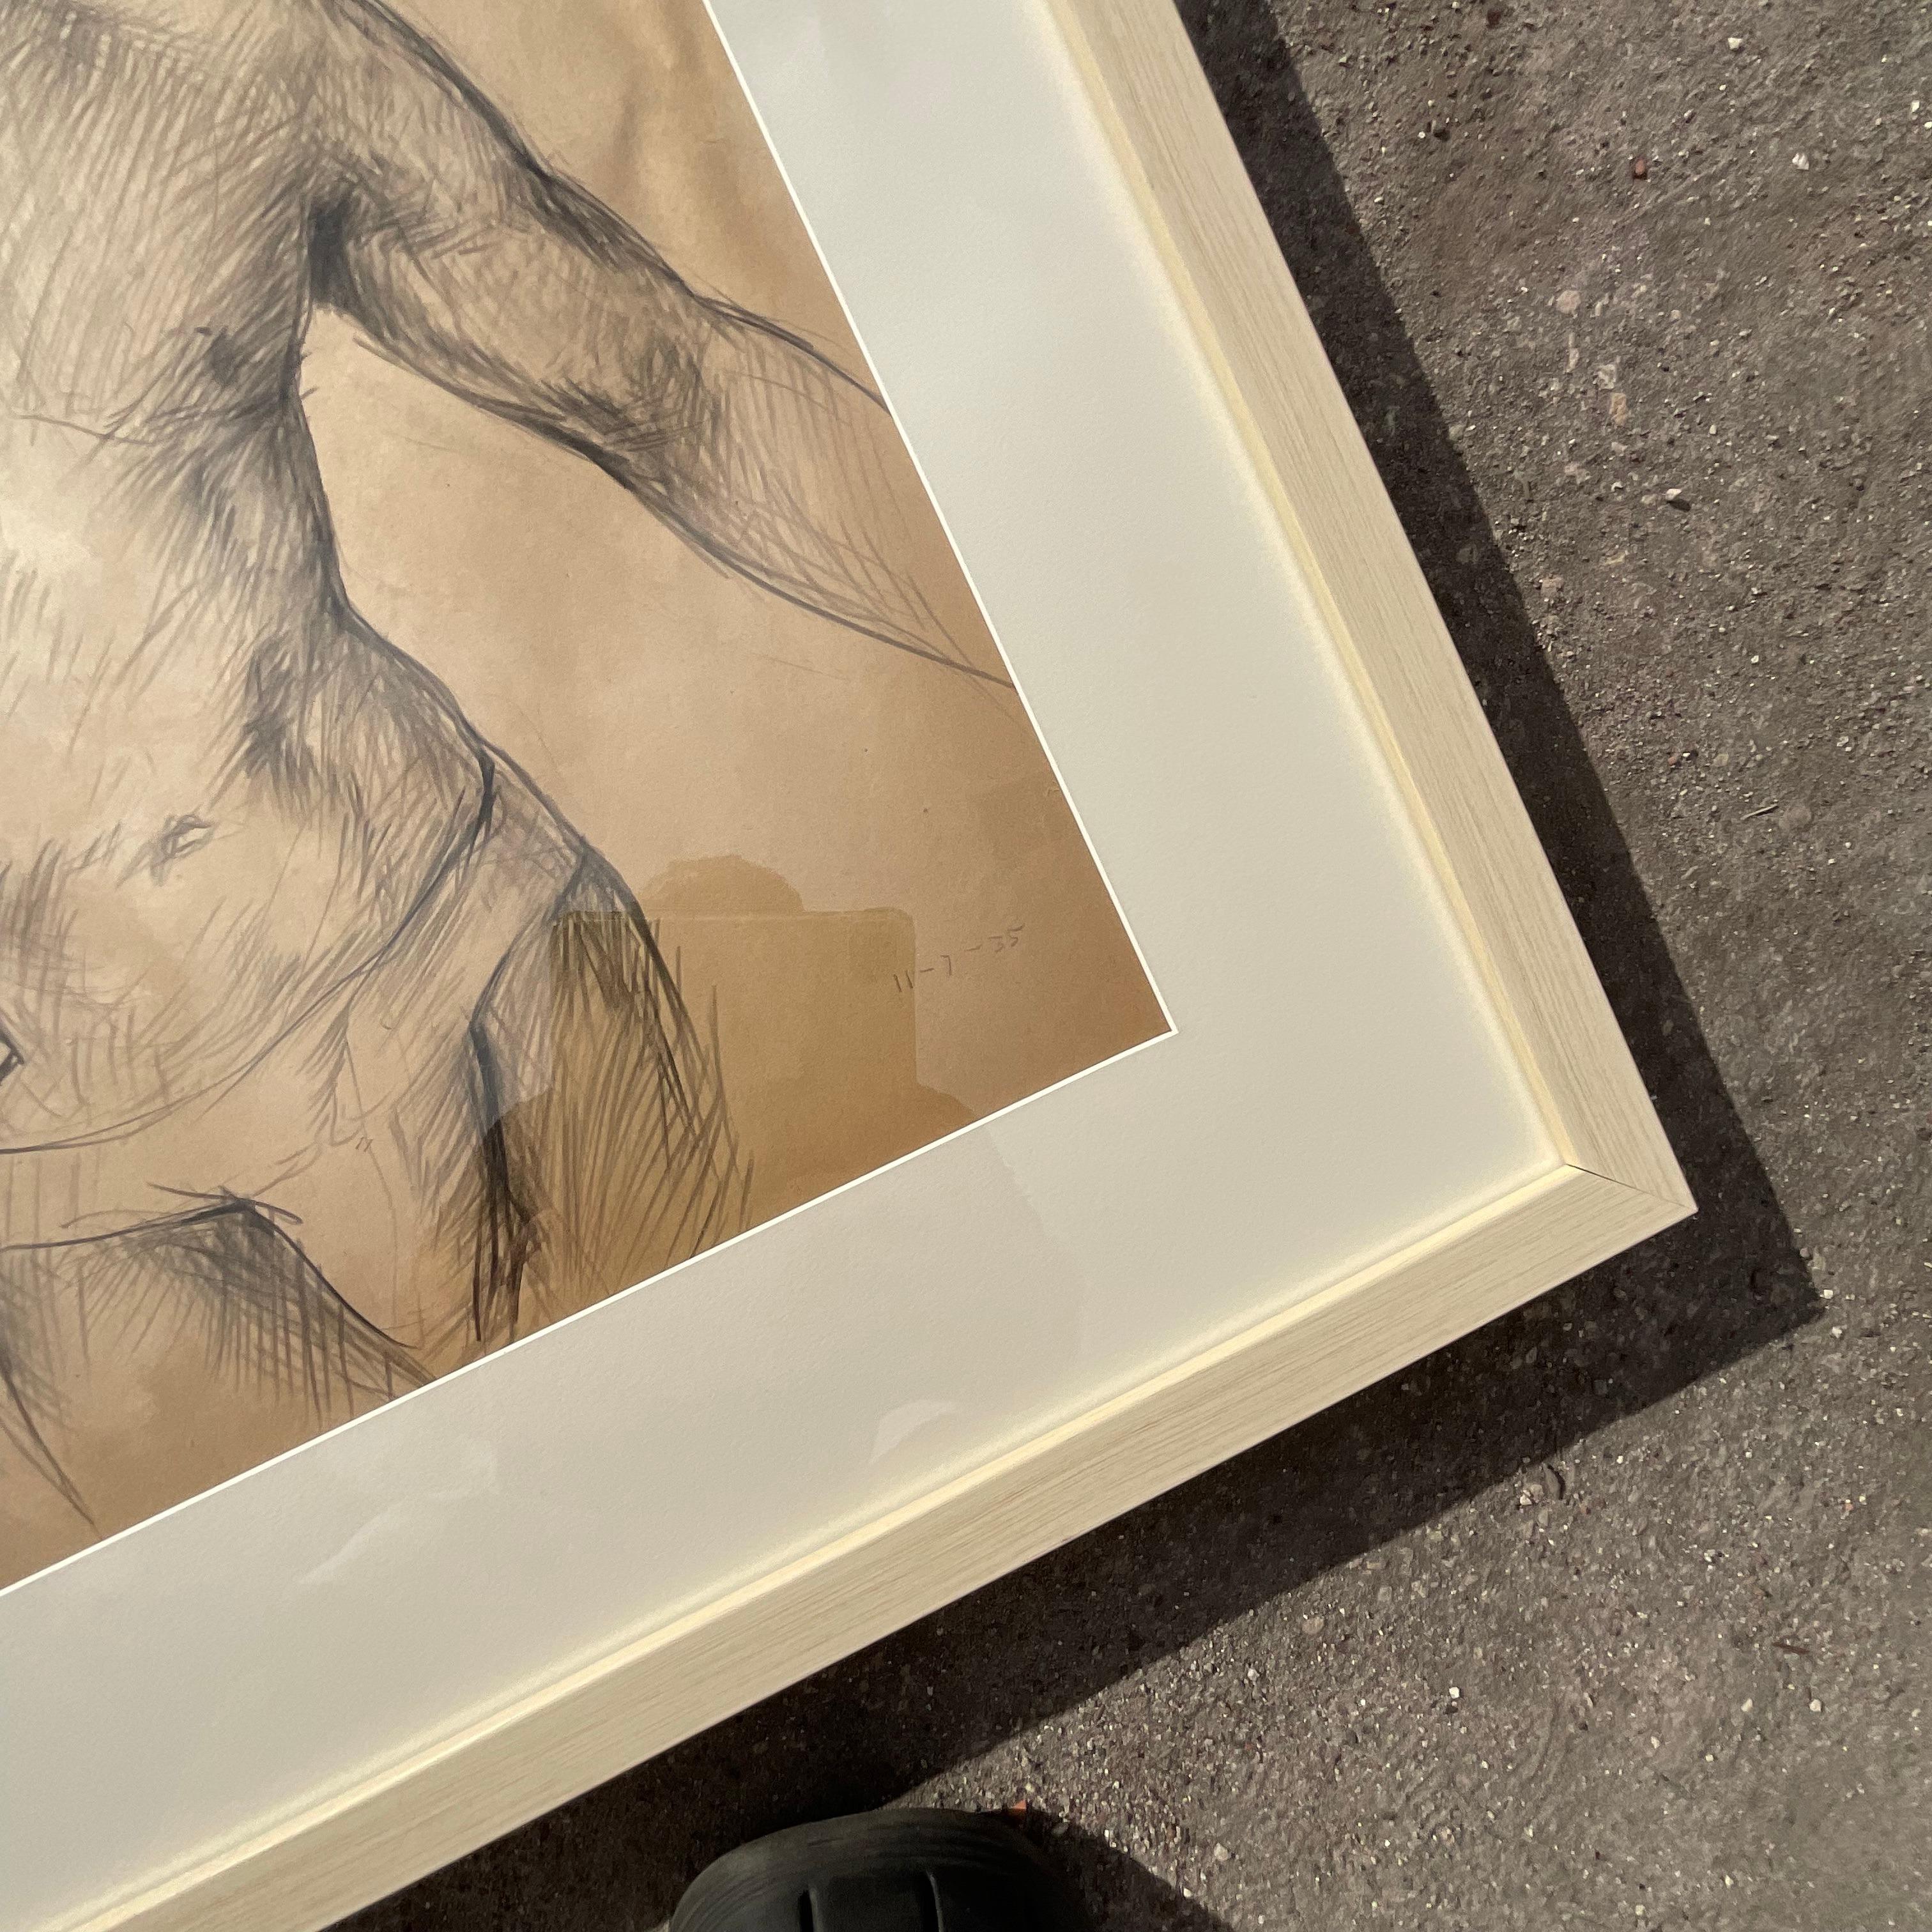 Vintage Boho 1935 Figure Sketch of Man In Good Condition For Sale In west palm beach, FL